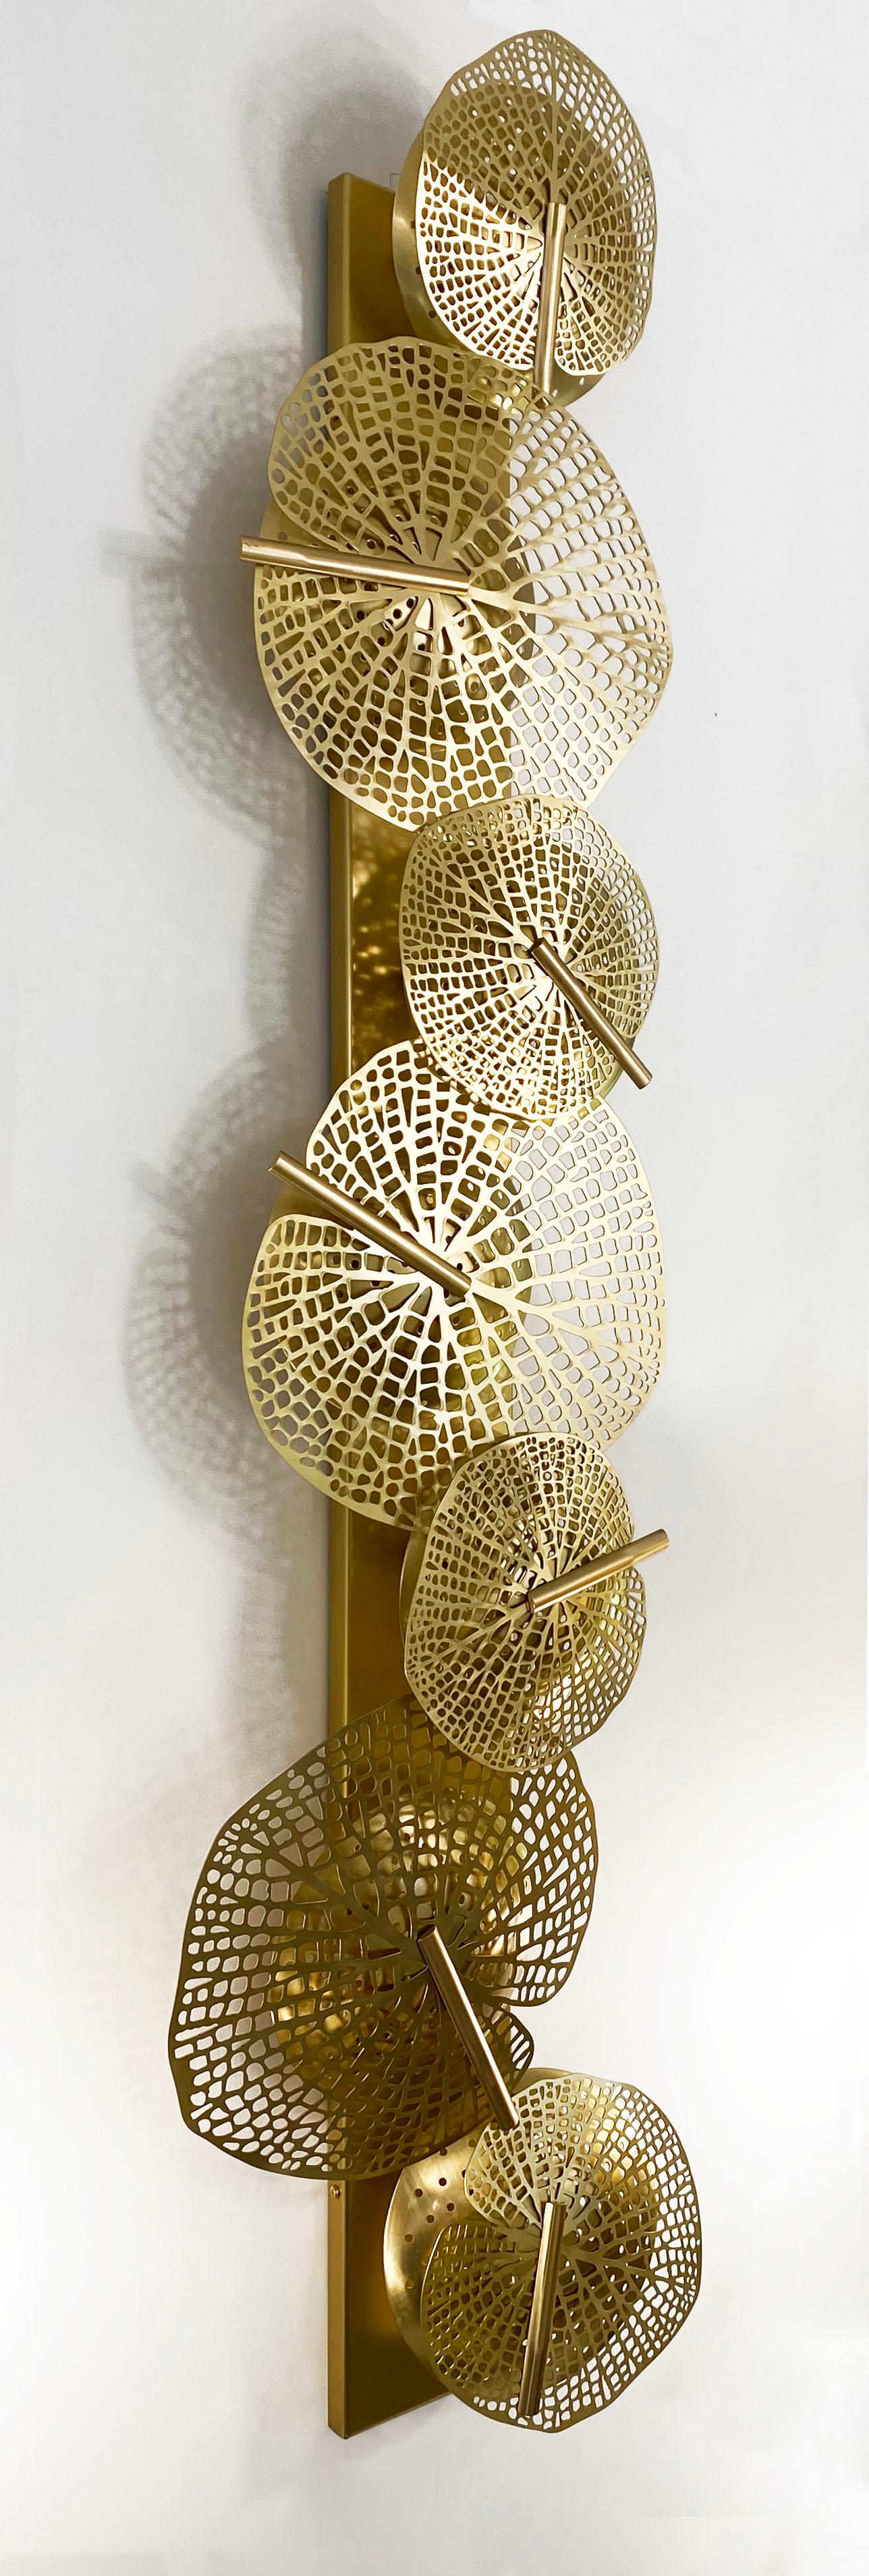 We give you the outside to bring into your interiors! The brass leaves of different sizes on this Art Deco Design sculpture wall light introduce nature and it is in itself a unique Work of Art, entirely handcrafted, engraved and laser-cut.